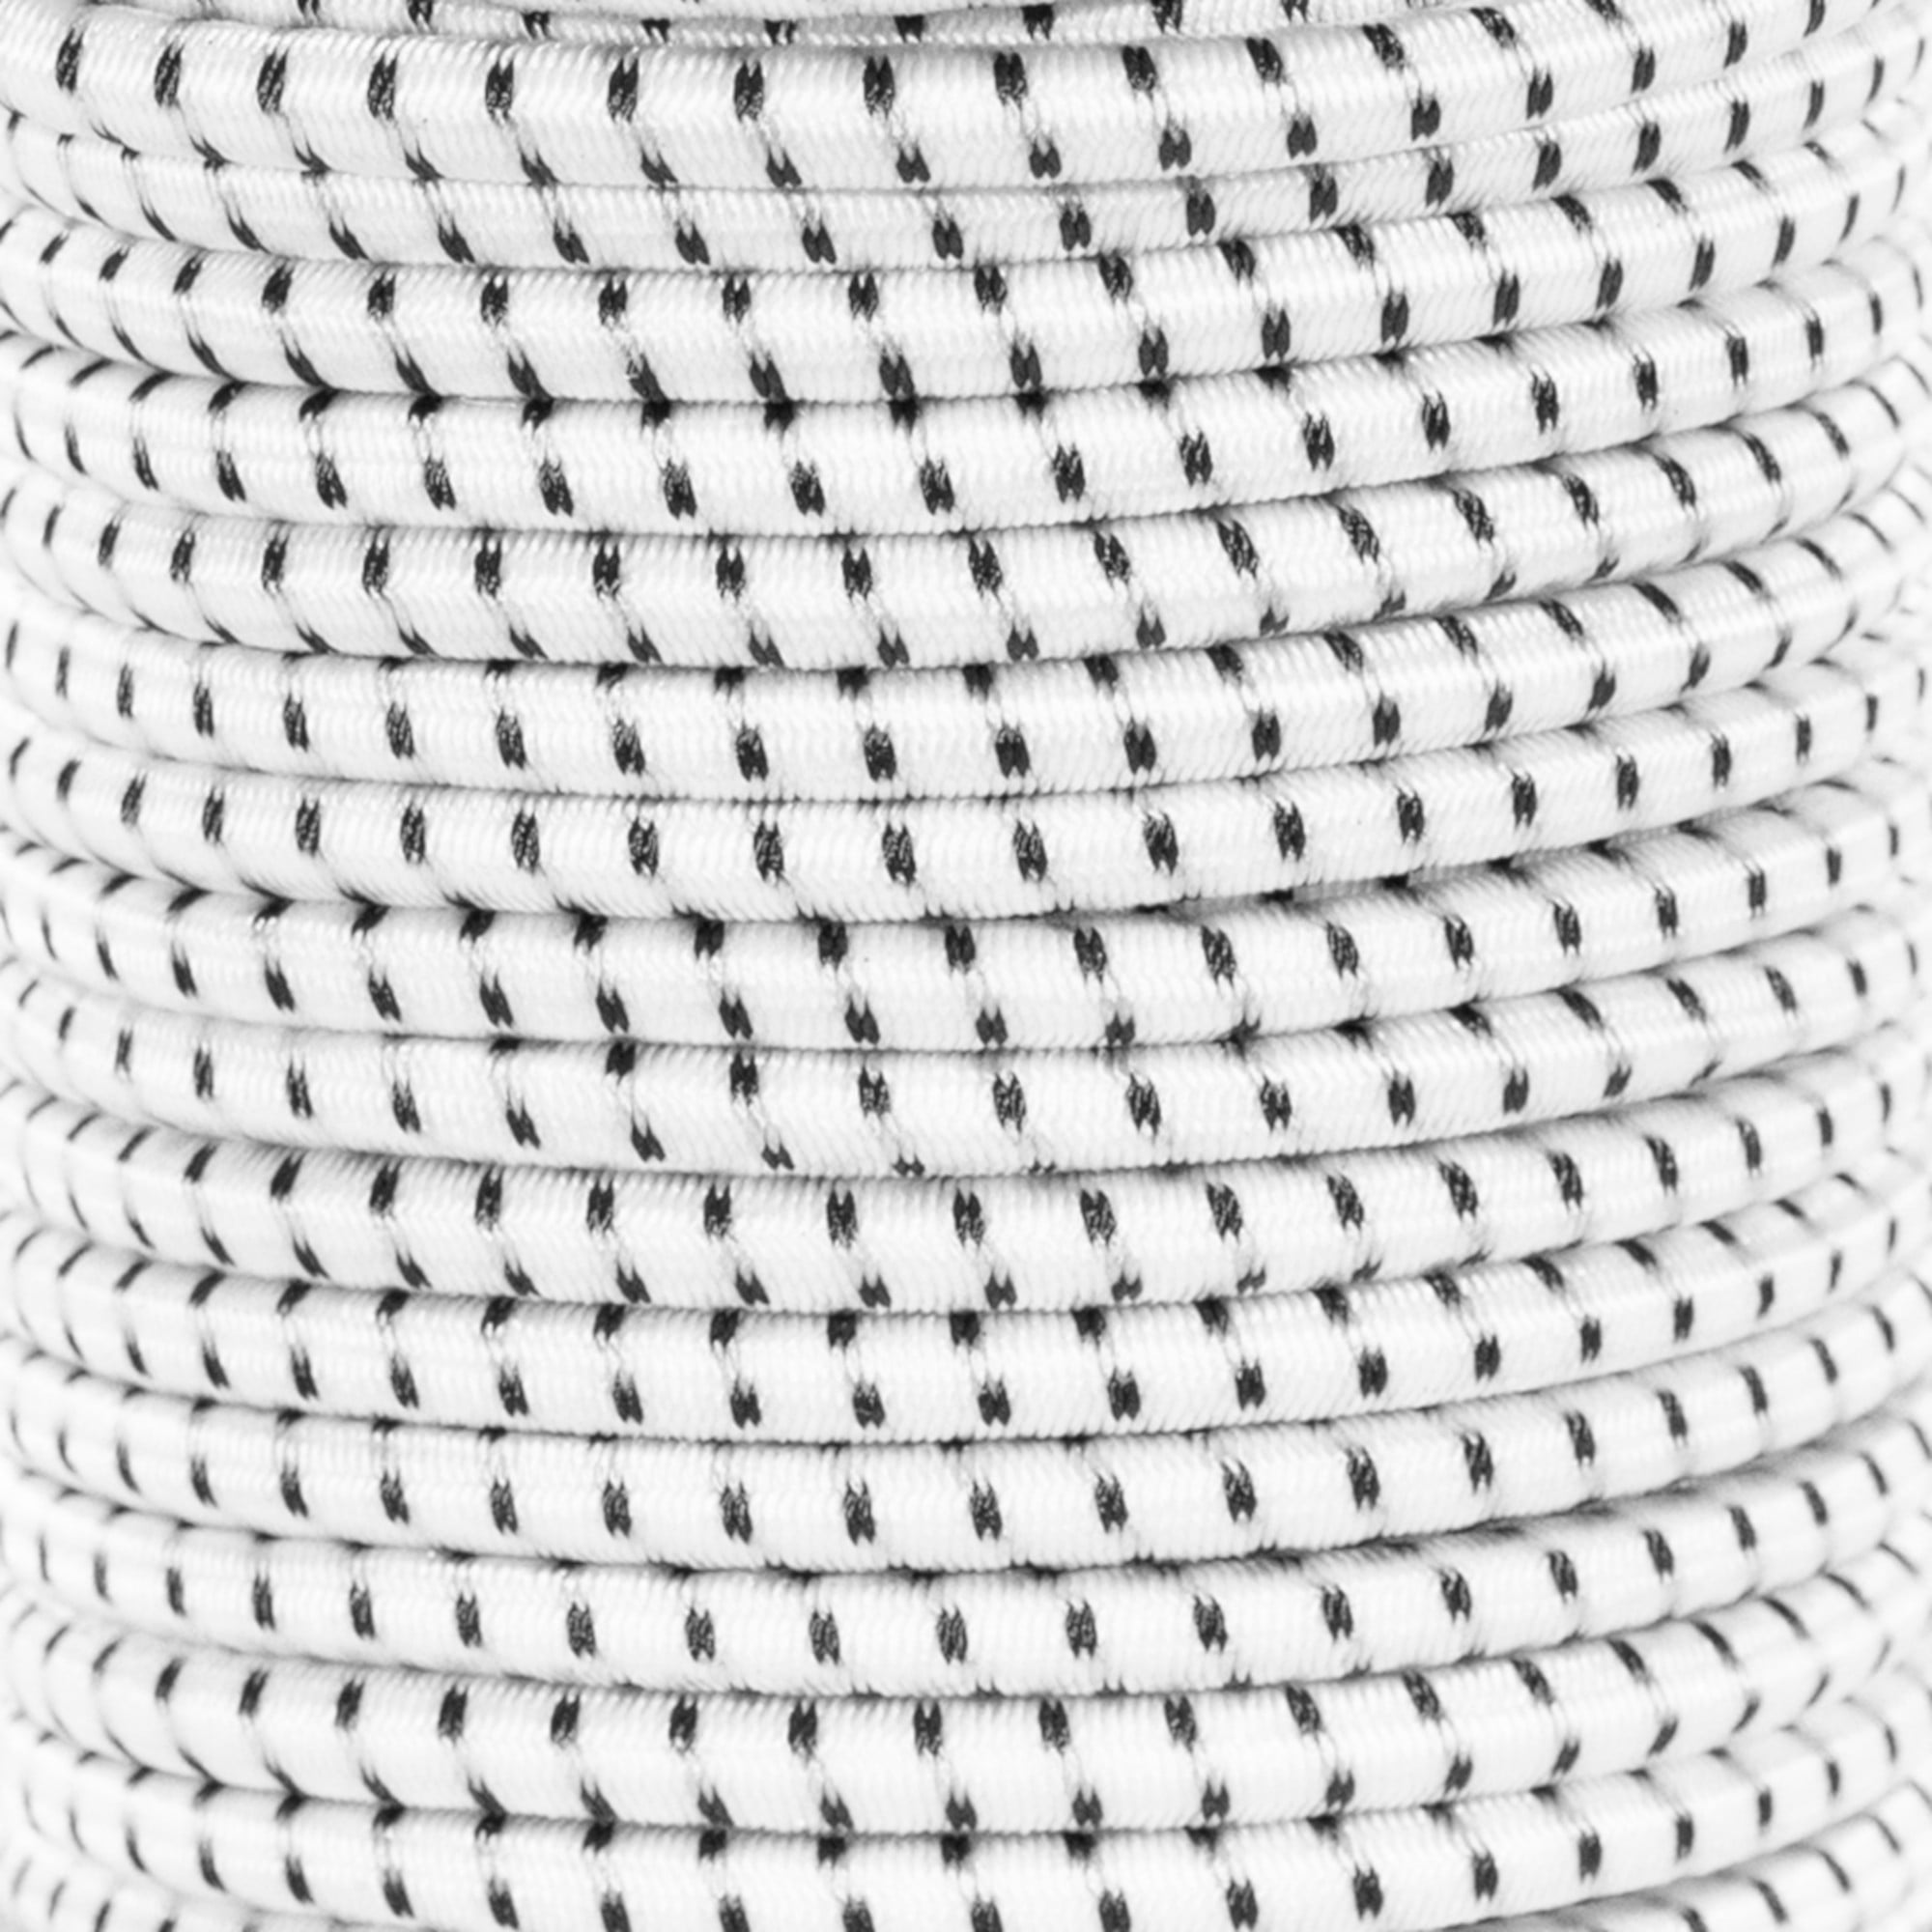 5/16" 1000 ft Bungee Shock Cord White With Black Tracer Marine Grade Heavy Duty 